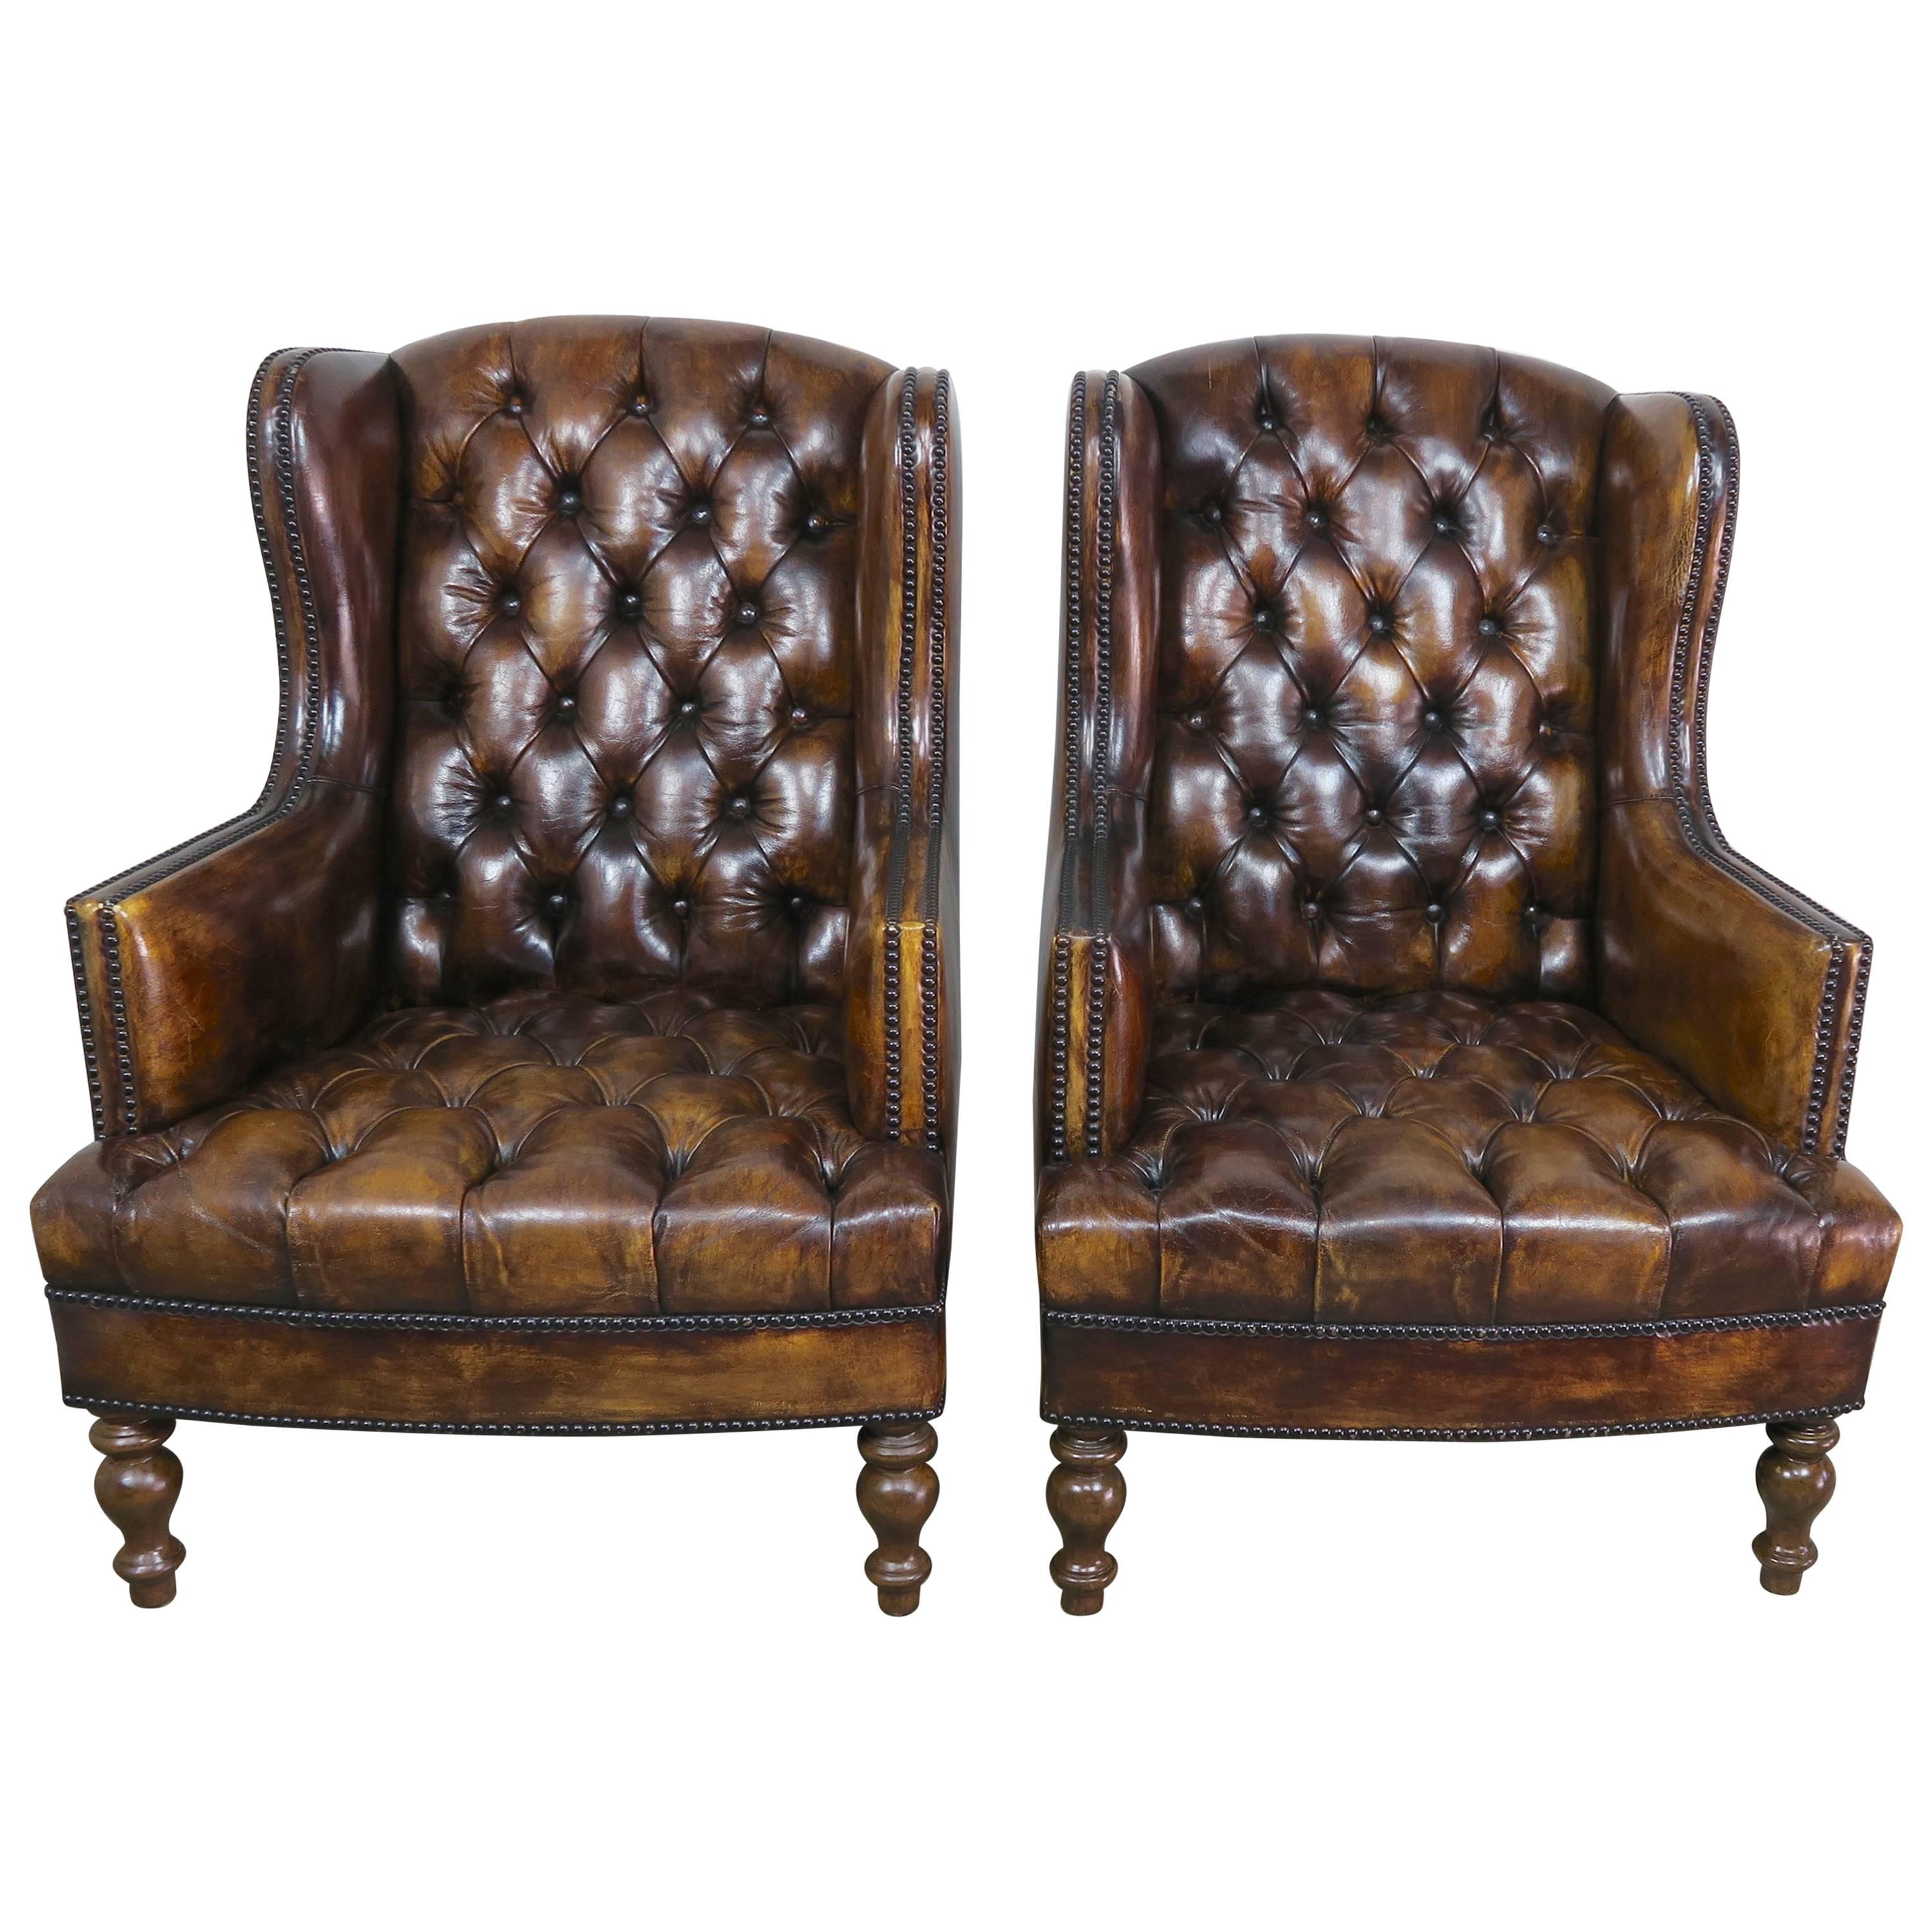 Pair of English Leather Tufted Armchairs